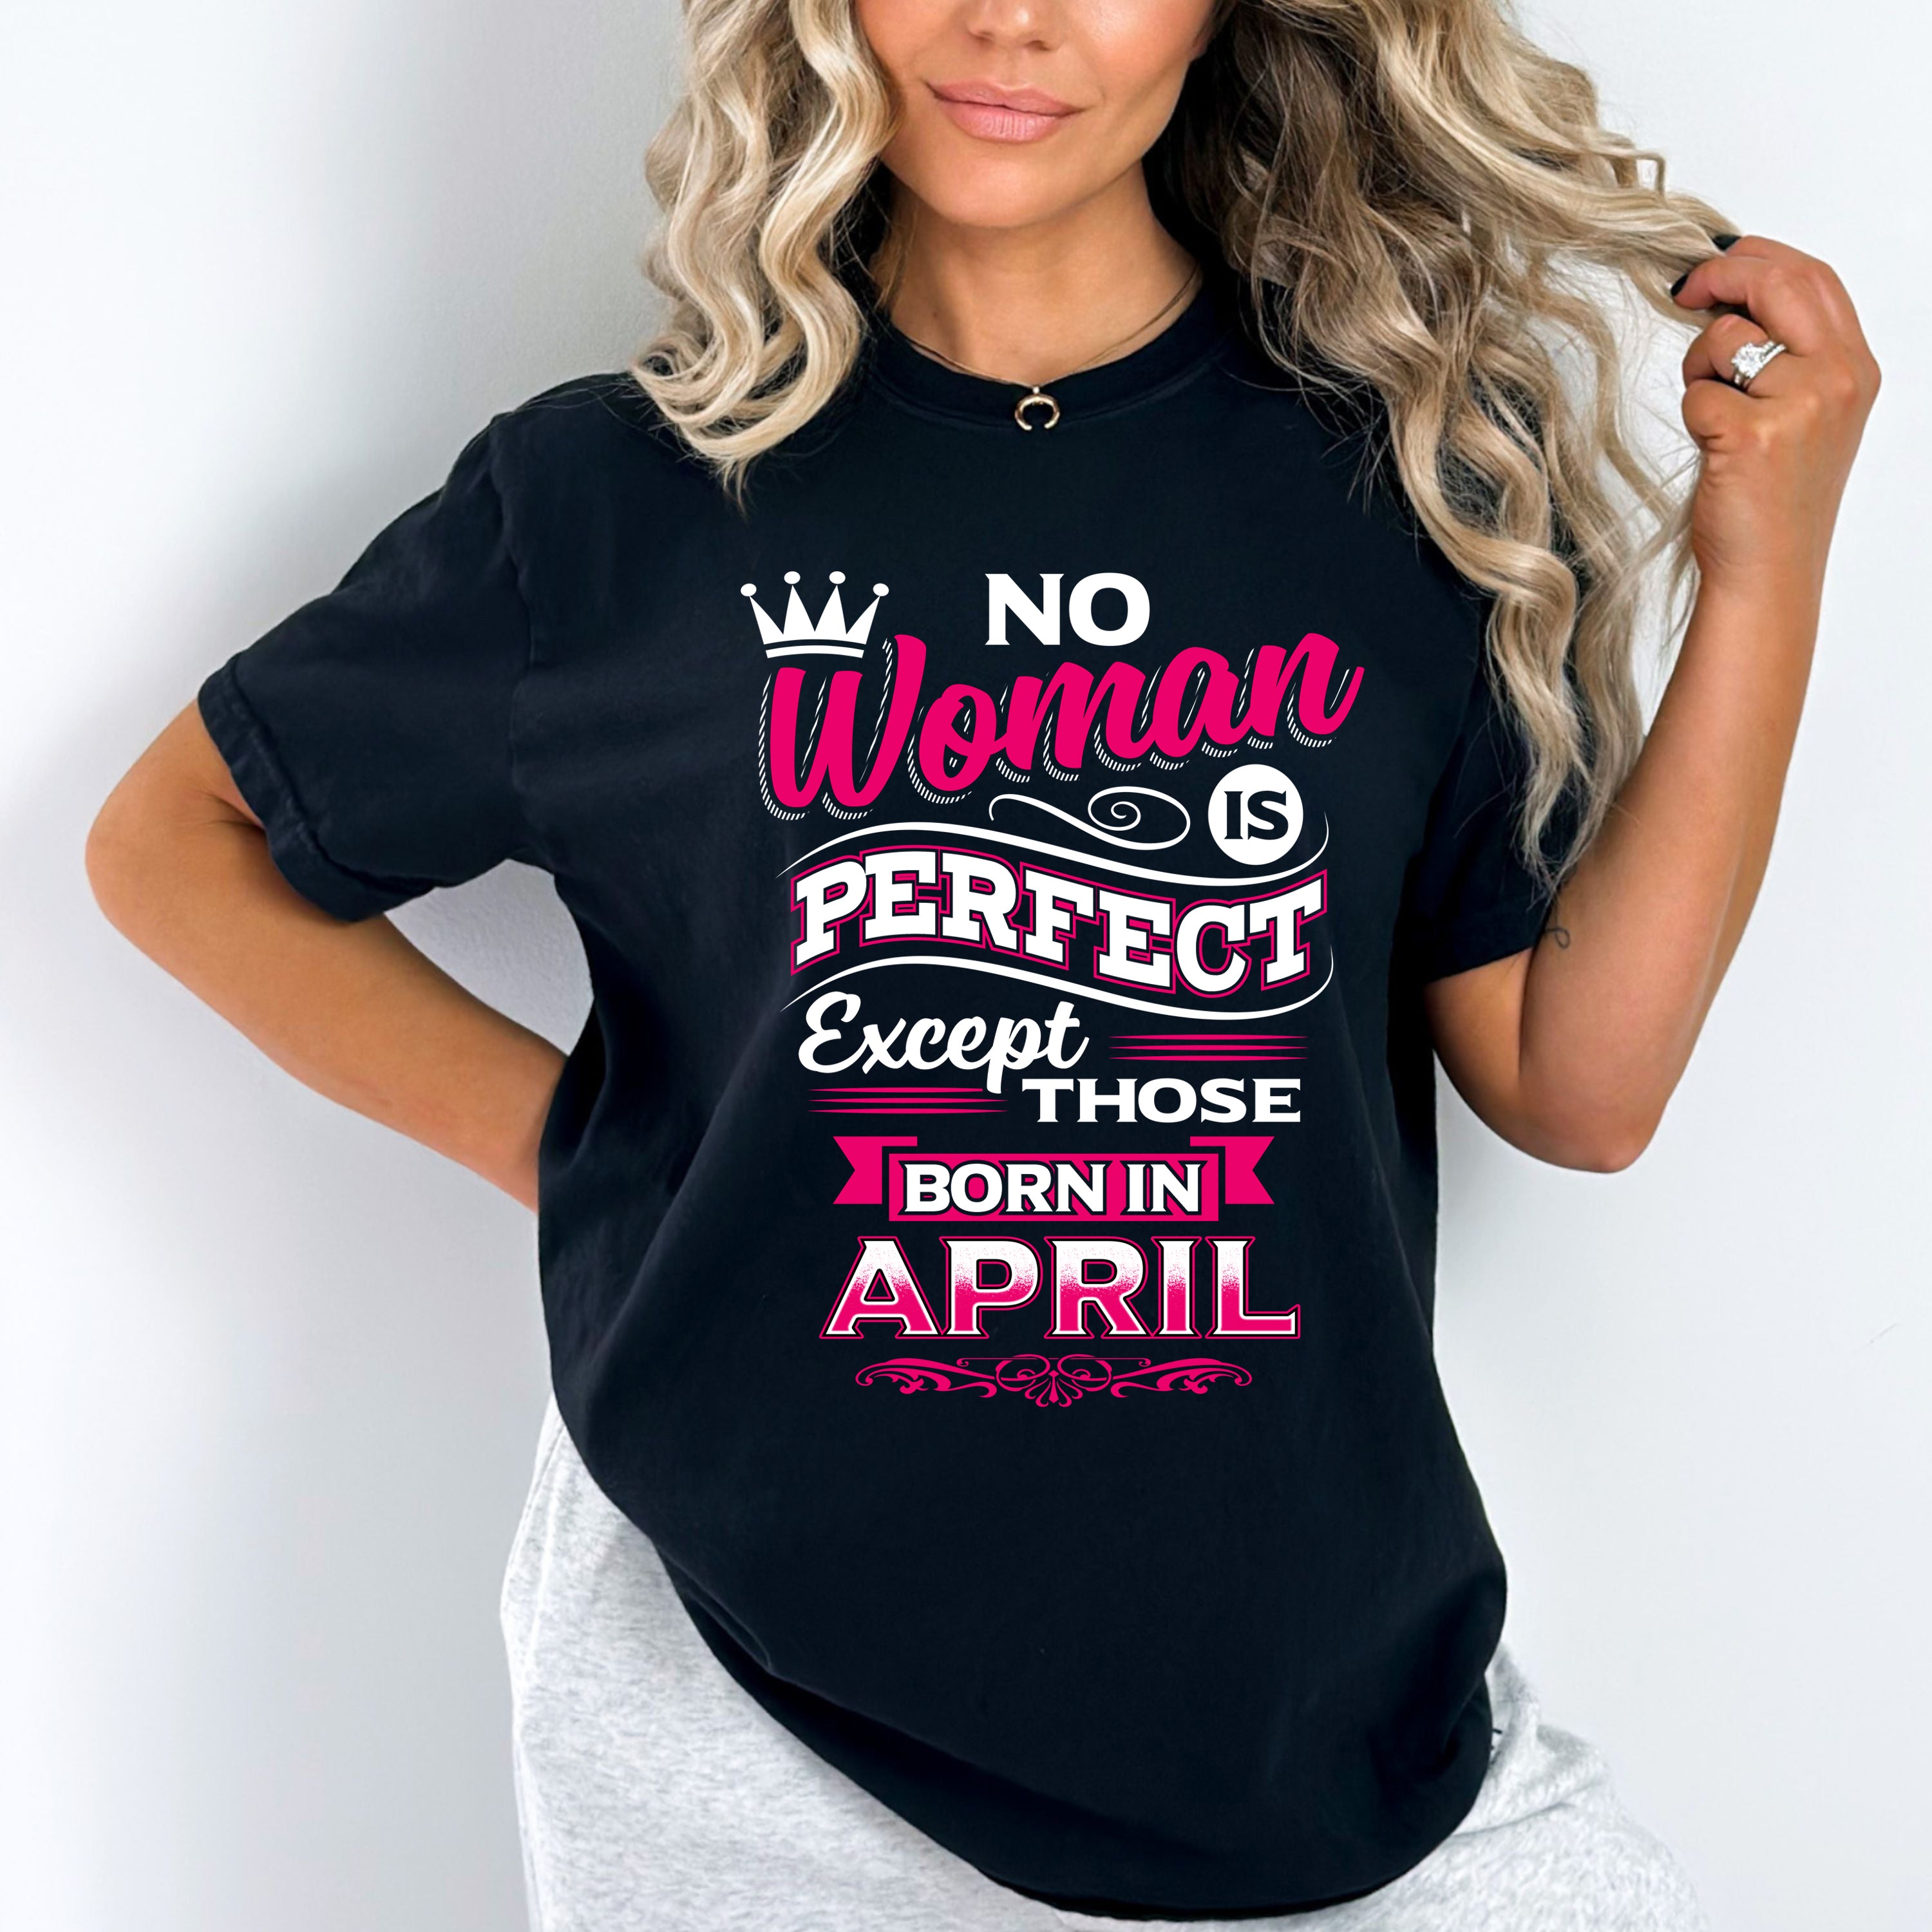 "No Woman Is Perfect Except Those Born In April"